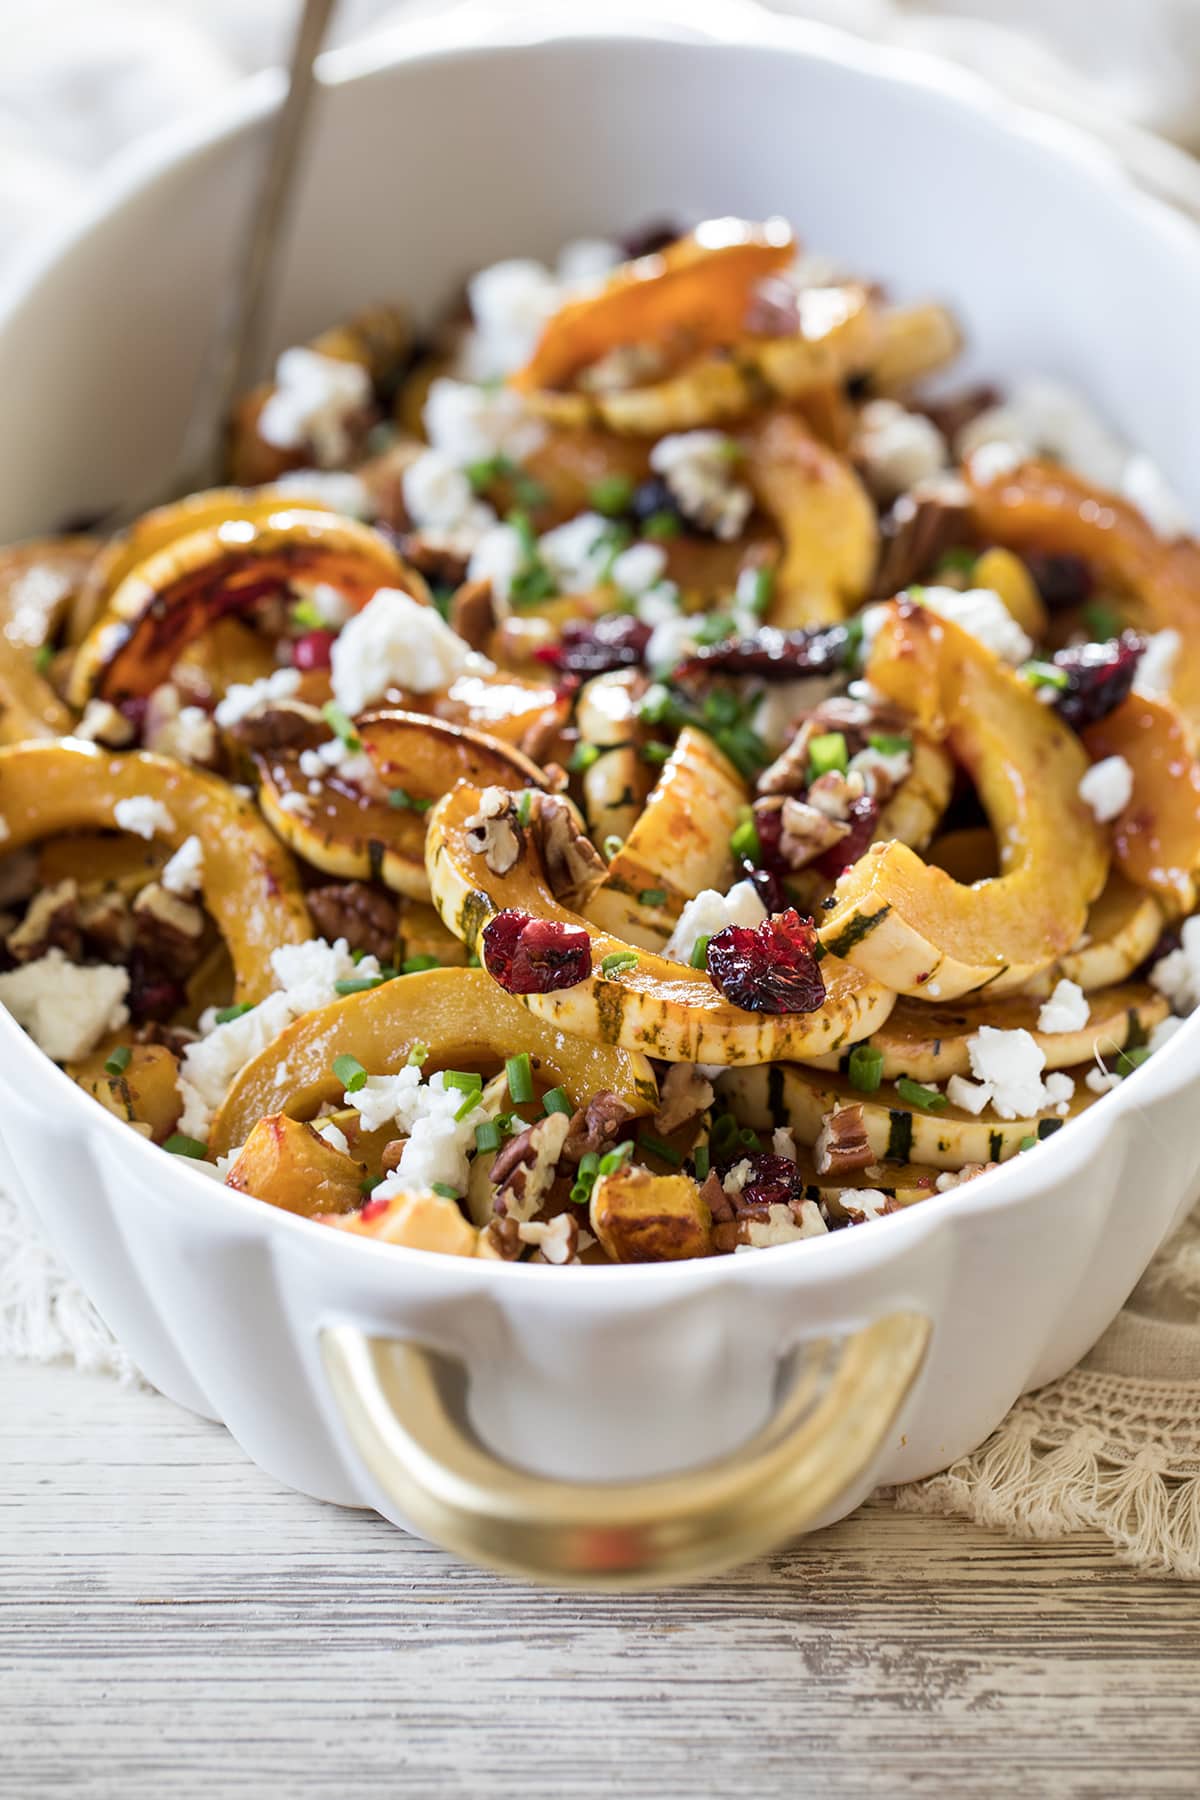 Roasted Delicata Squash with Cranberries and Feta makes a perfect Thanksgiving side dish #thanksgiving #delicata #squash #healthy